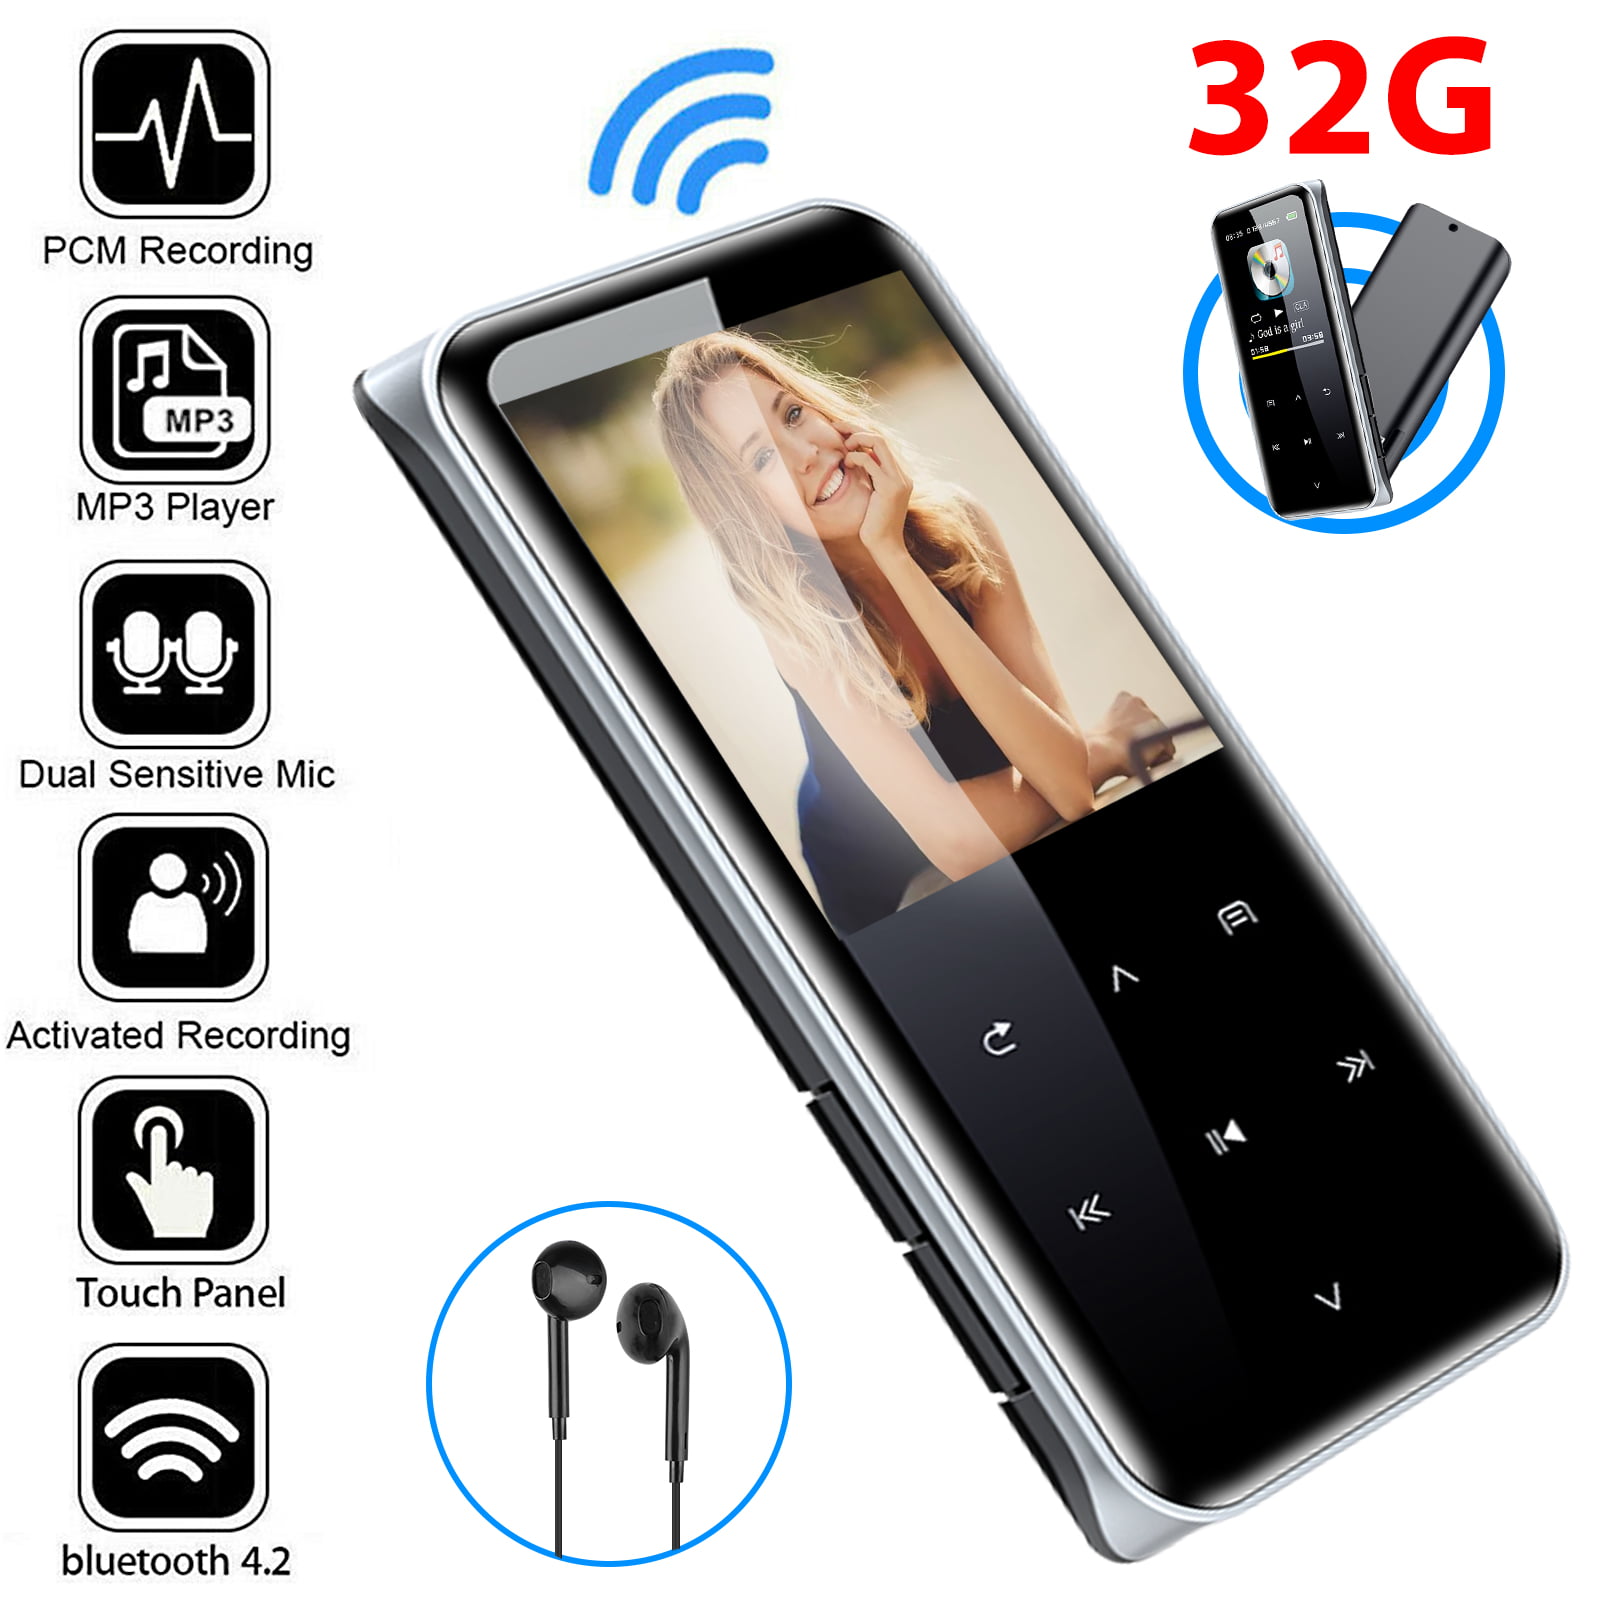 Built-in Speaker 1.2 Inch Full Touchscreen,Black,32G MP3 Player with Bluetooth 4.2 HiFi Lossless Sound MP3 Music Player 